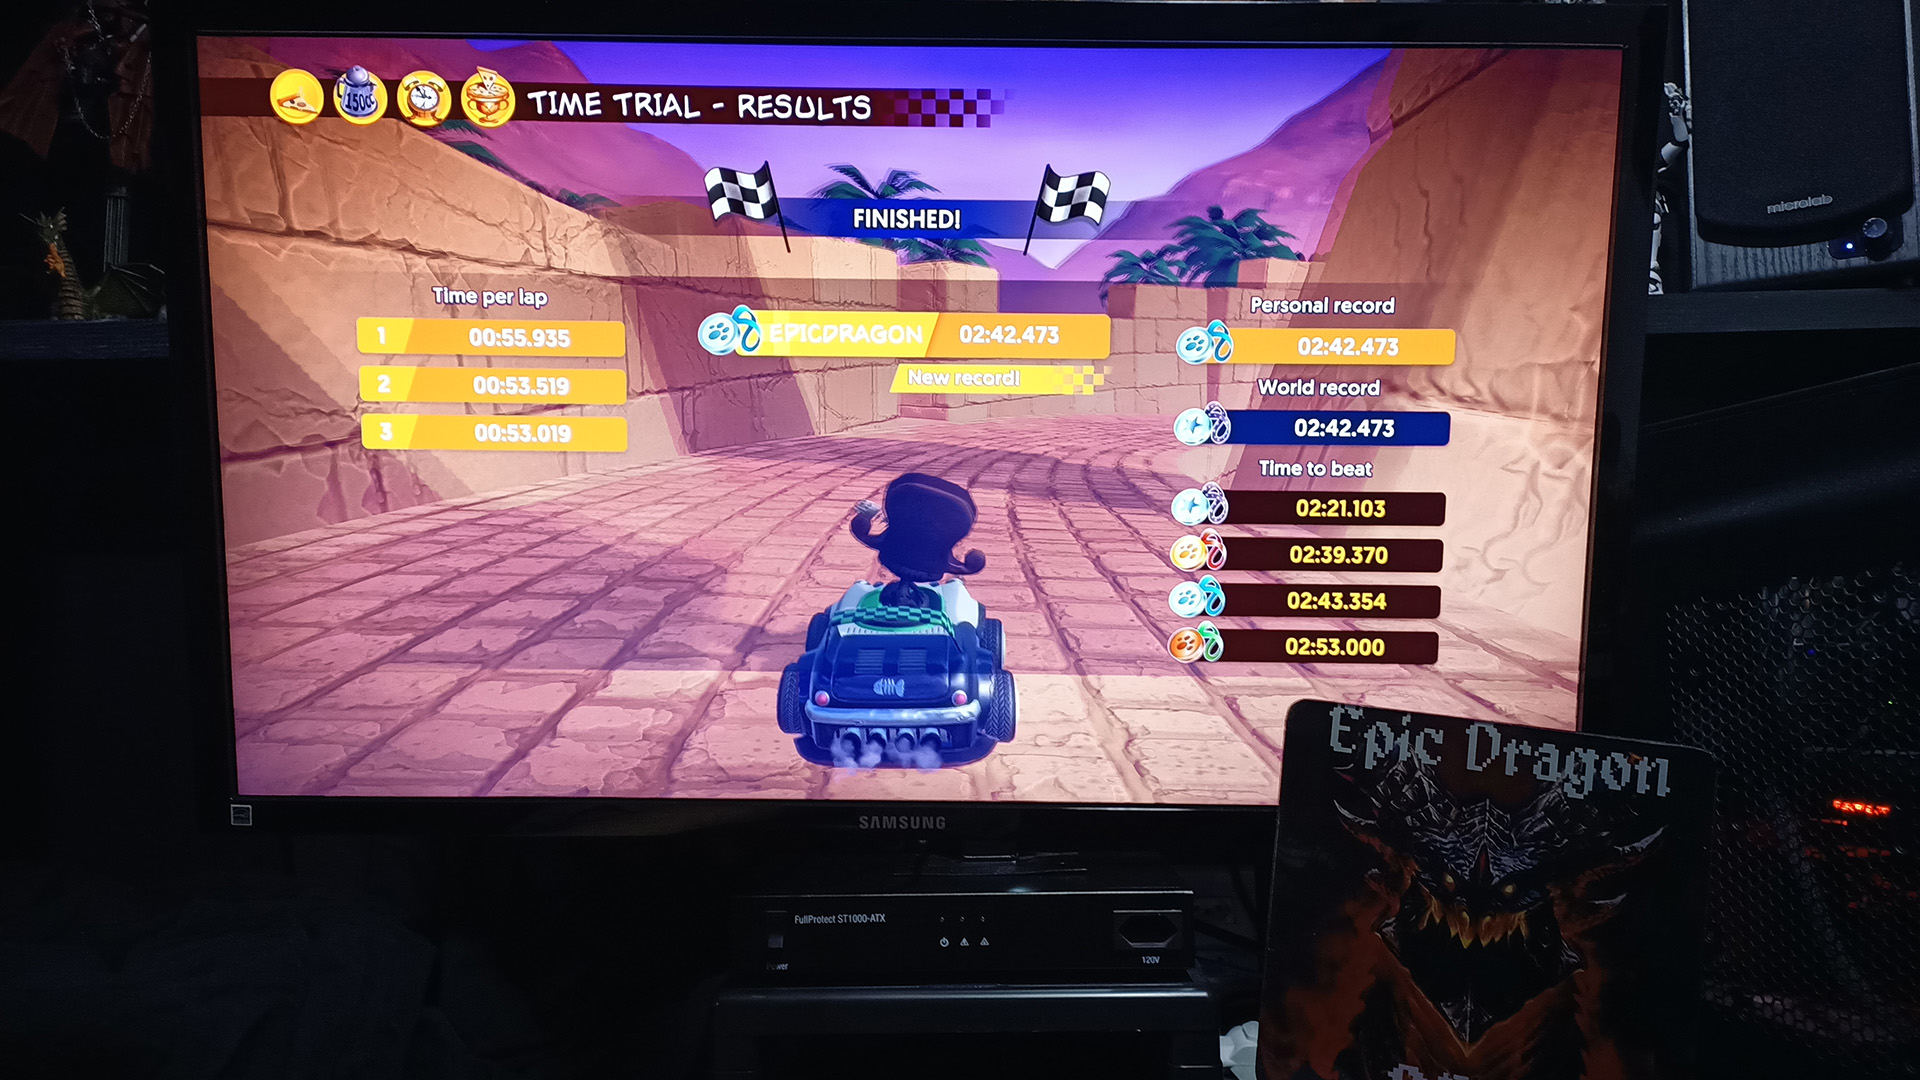 Garfield Kart Furious Racing: Valley Of The Kings [Time Trial: 3 Laps] time of 0:02:42.473